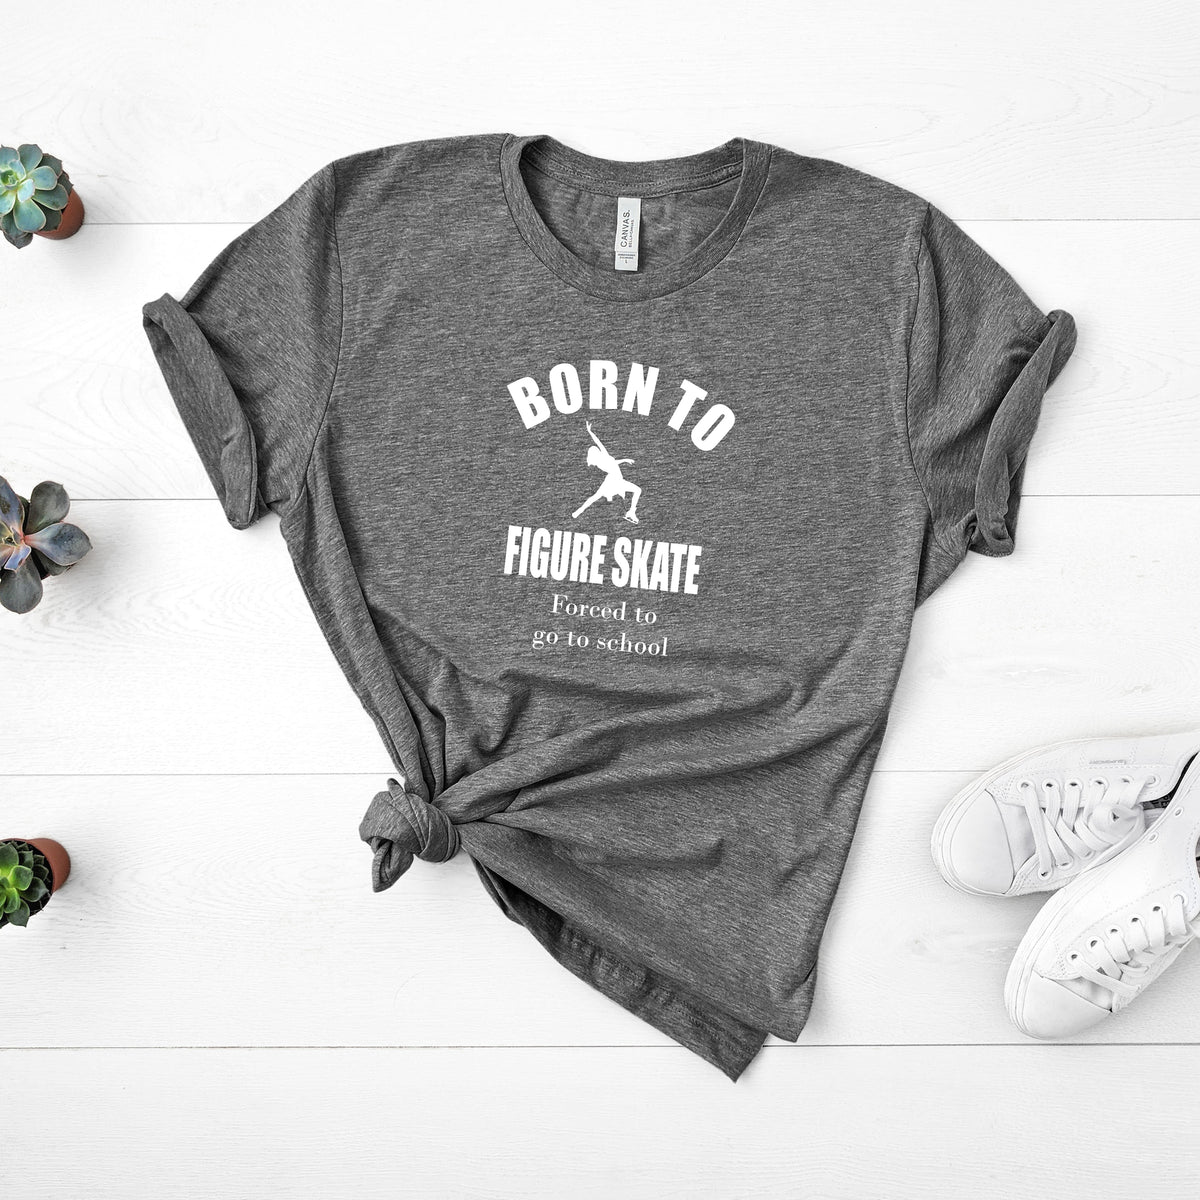 Youth T-shirt - Born To Figure Skate Forced to Go to School